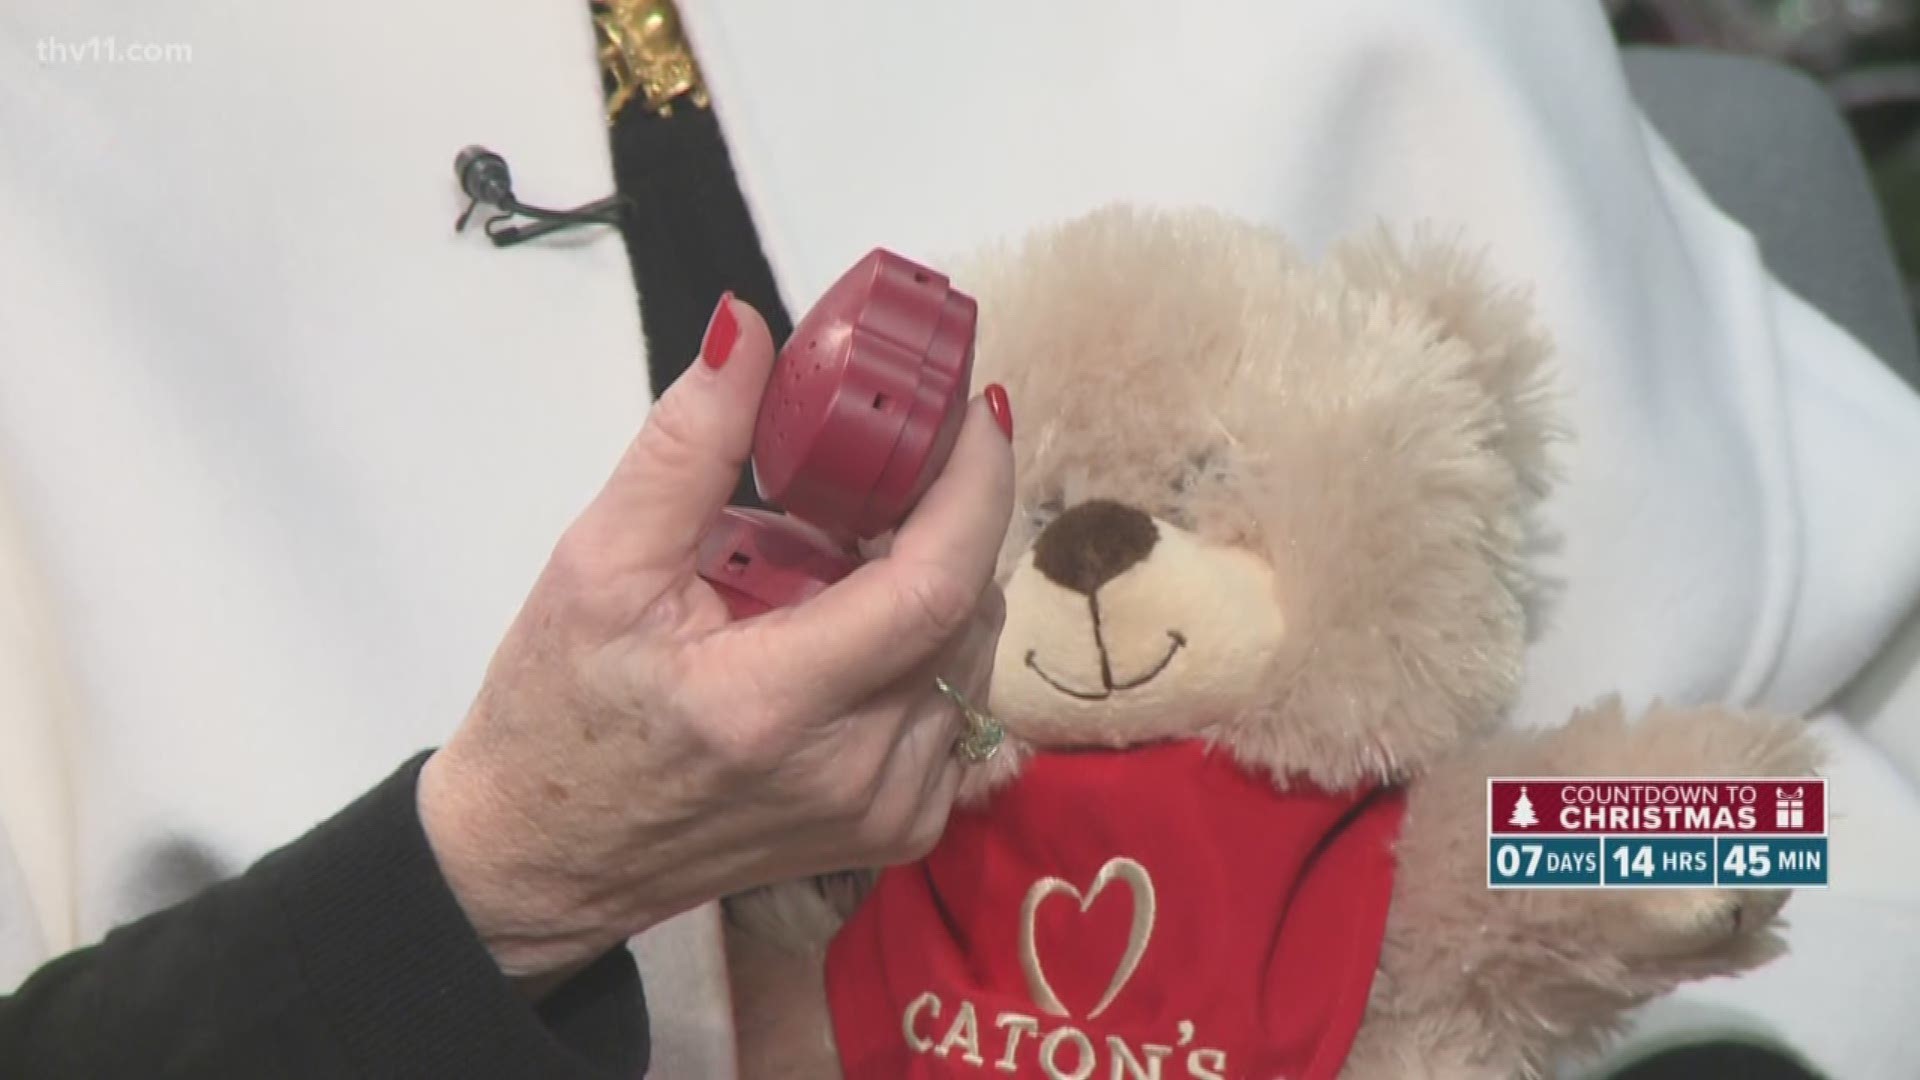 Arkansas Hospice Foundation works to give the gift of a hug this holiday season.